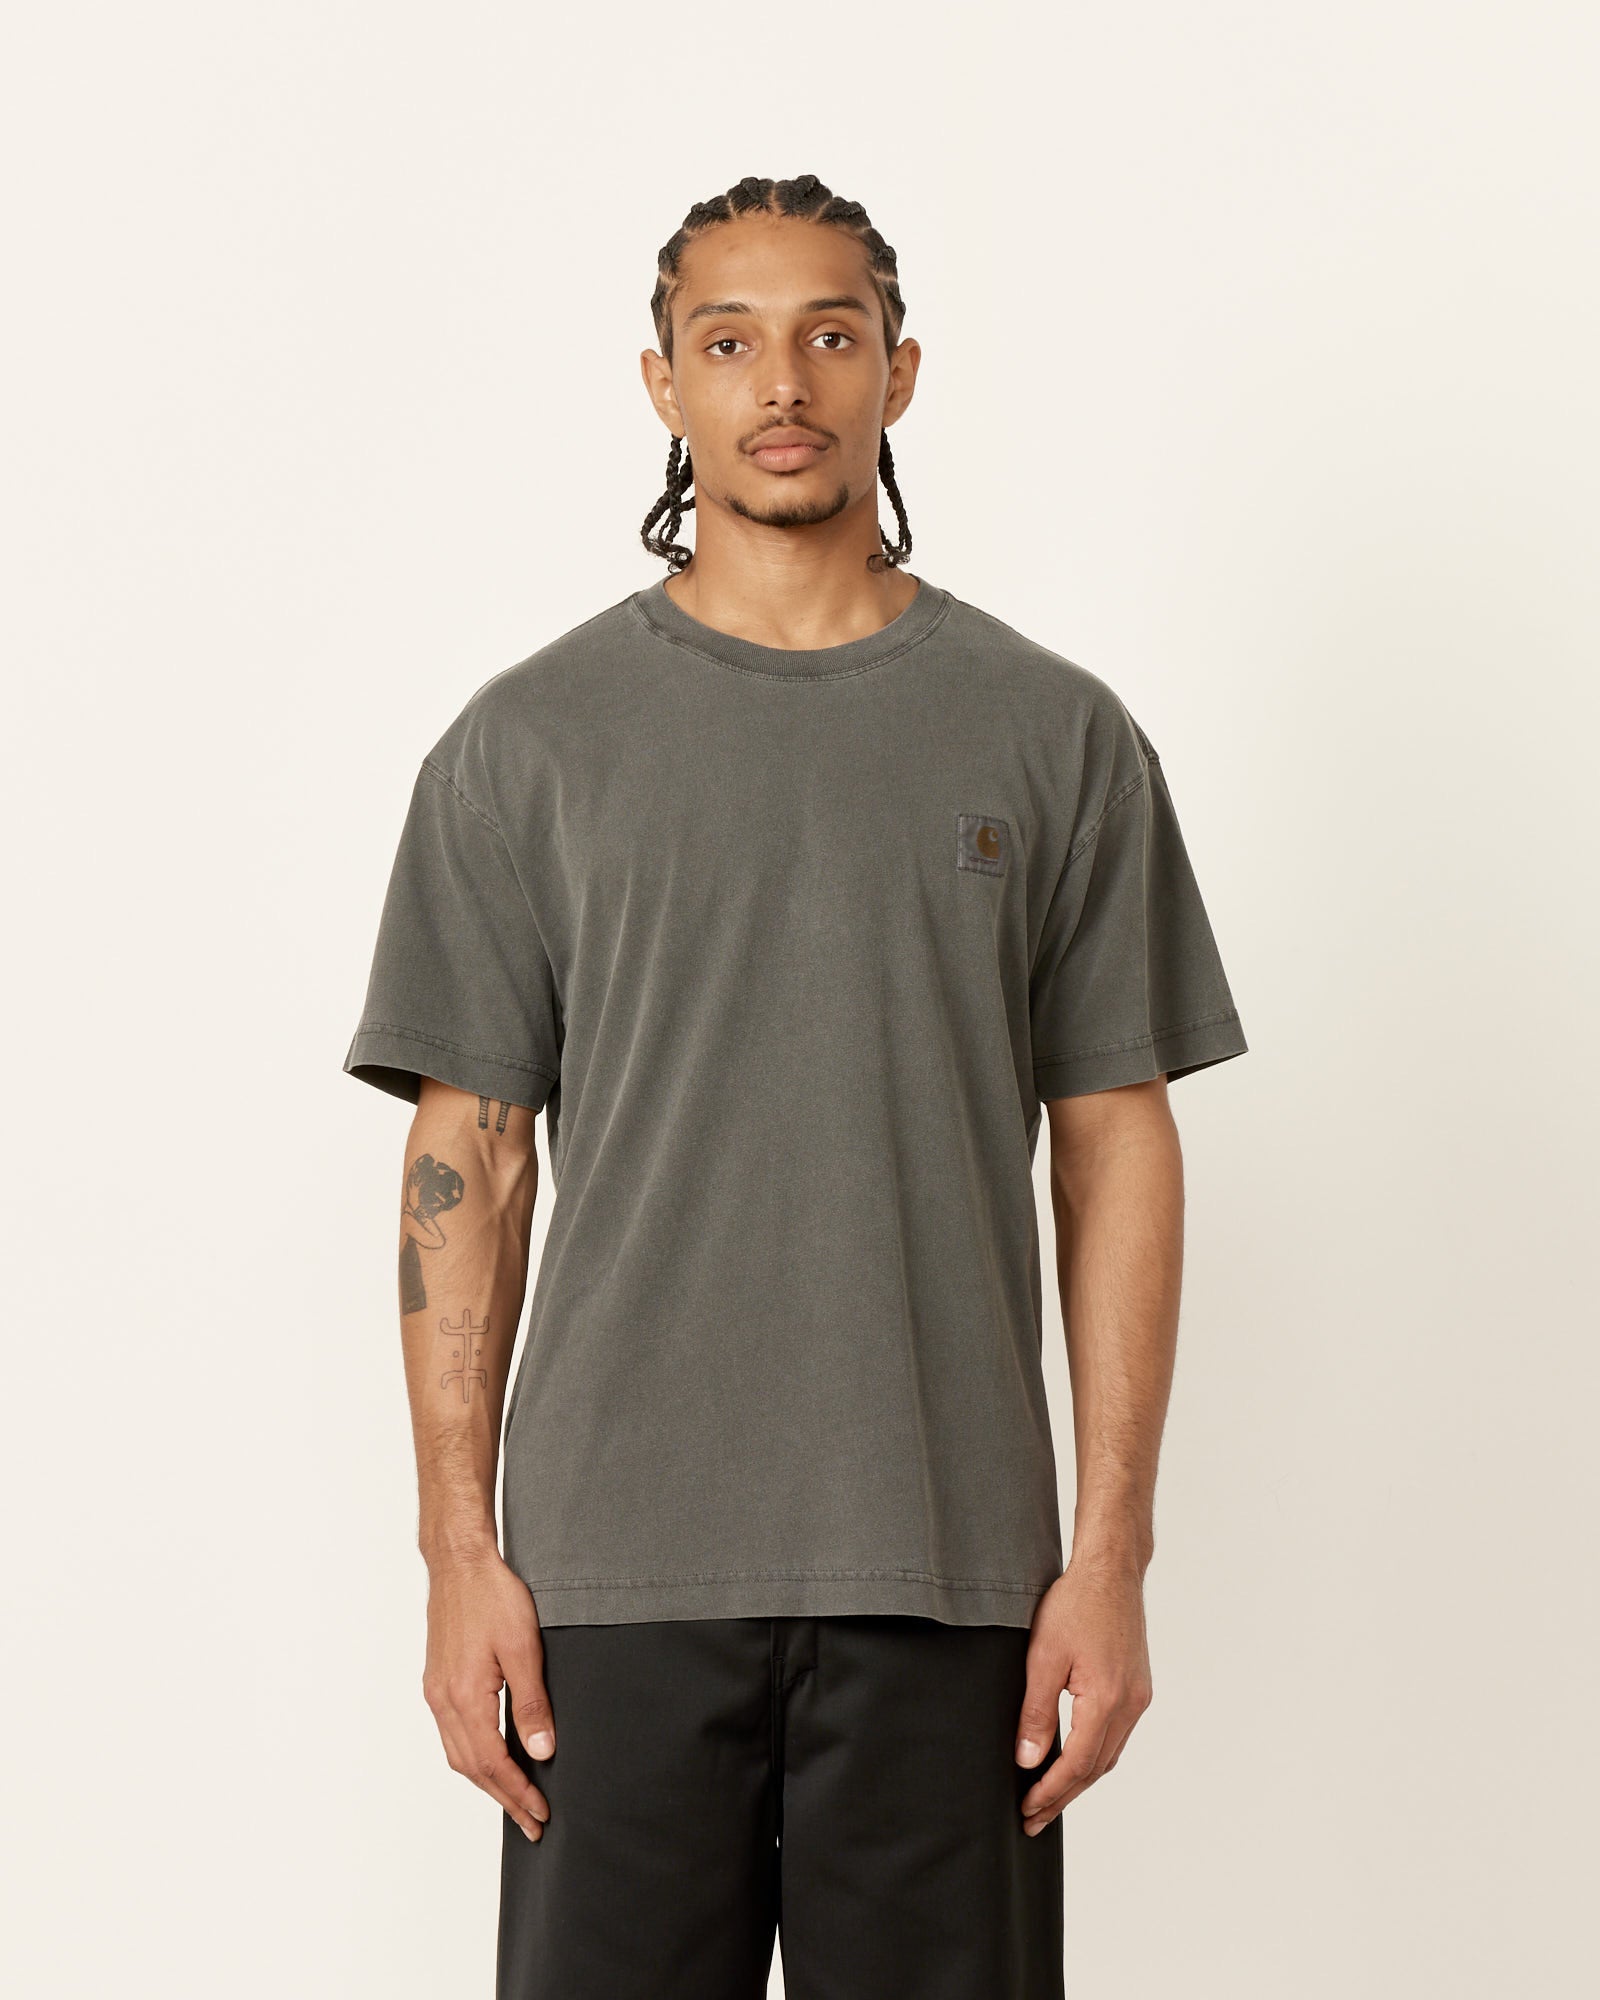 Nelson T-Shirt in Charcoal